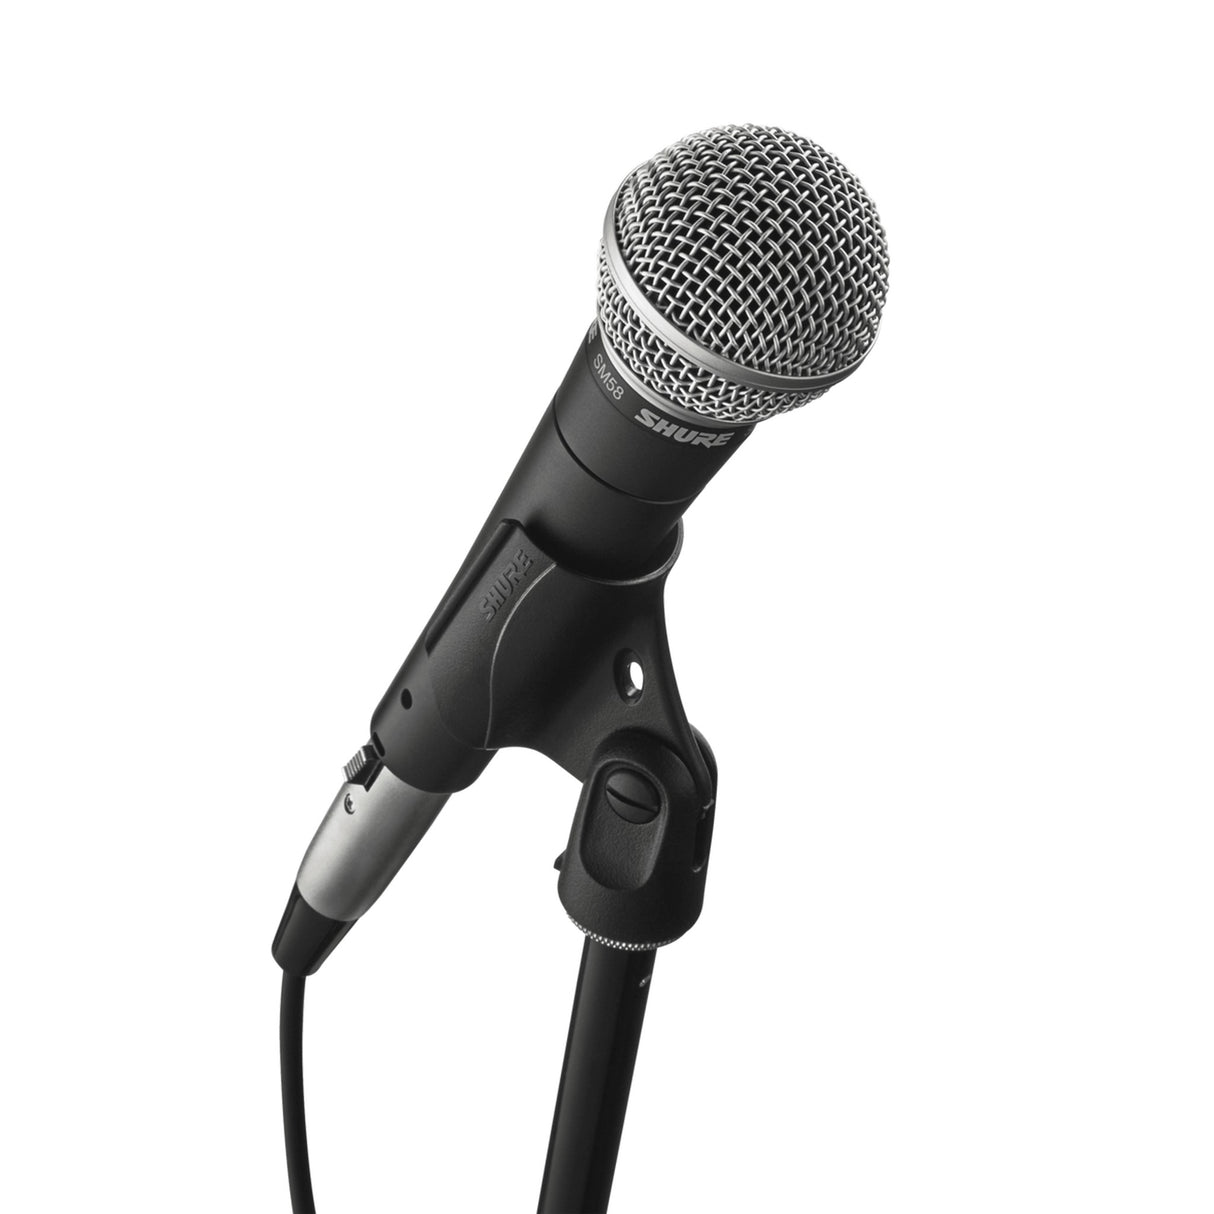 Shure SM58 Cardioid Dynamic Live Microphone without Cable